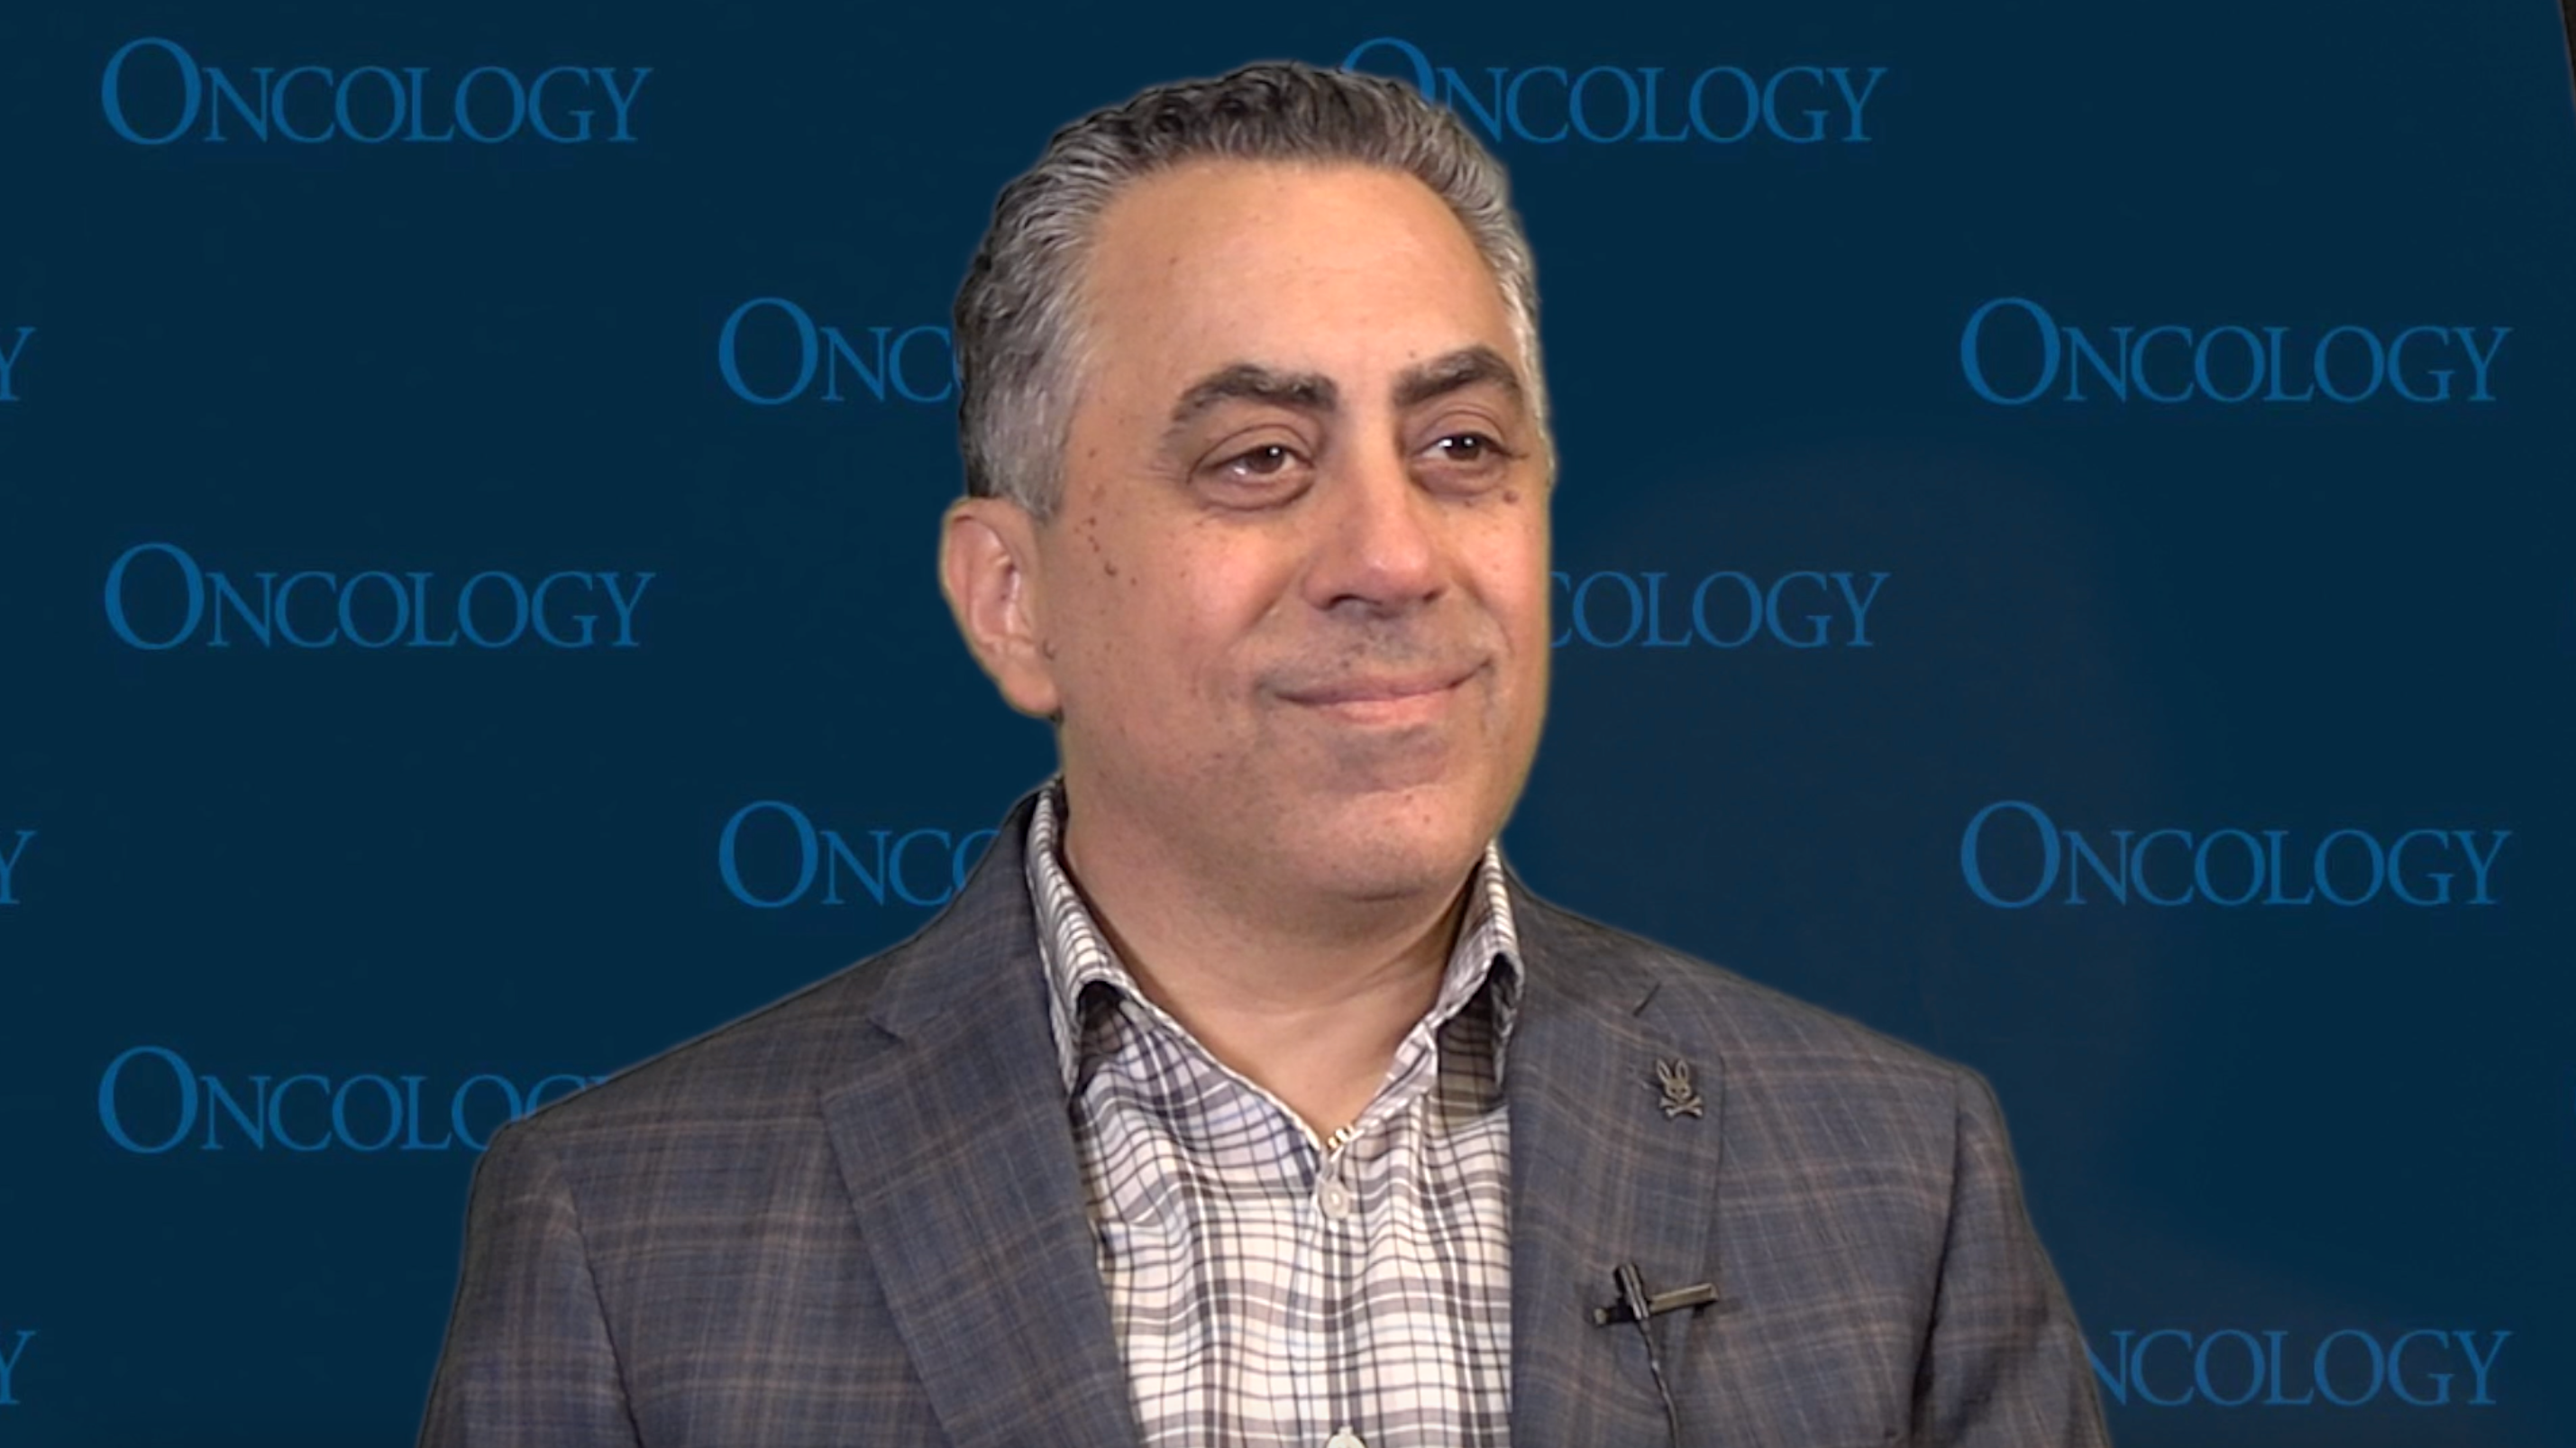 Tanio S. Bekaii-Saab, MD, on Potential of Dual Targeting to Transform Treatment of HER2+ CRC